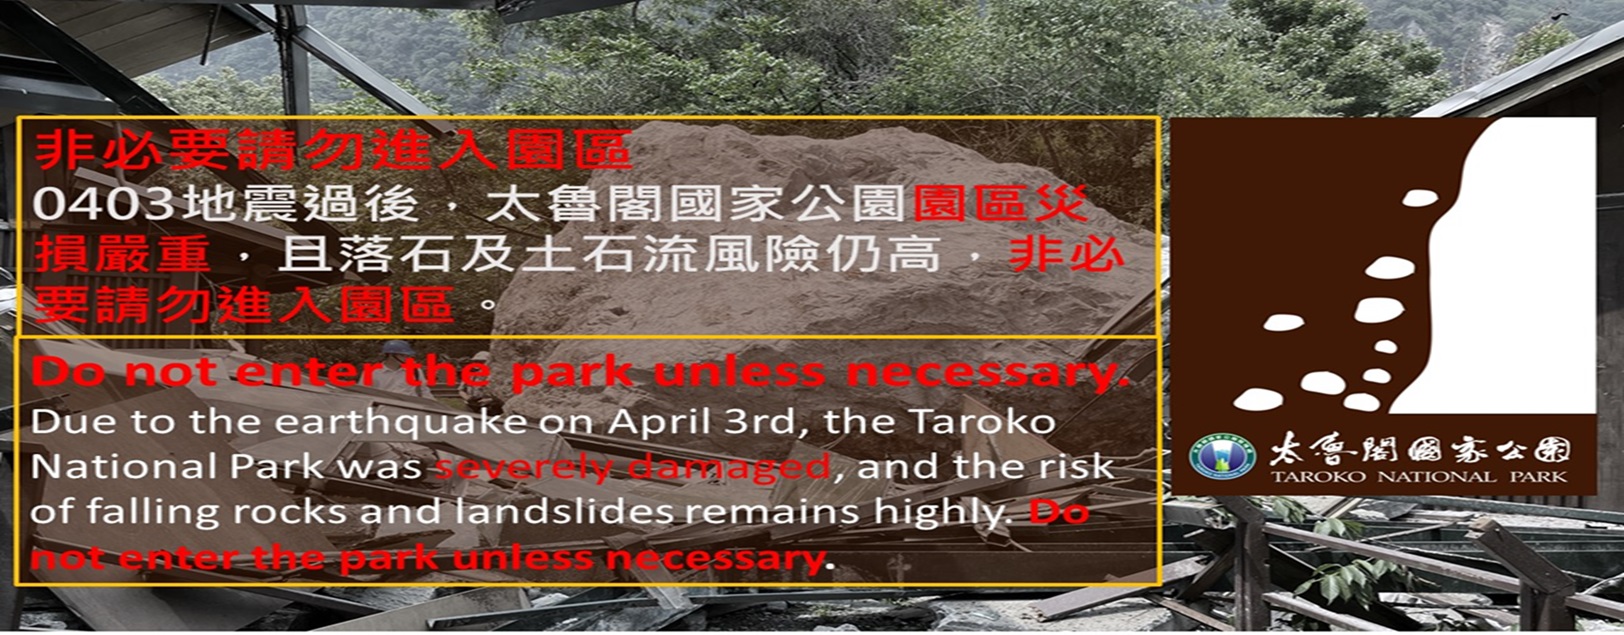 After the April 3rd earthquake, Taroko National Park has been severely damage, and the risk of falling rocks and landslides remains high. Please avoid entering the park unless absolutely necessary.